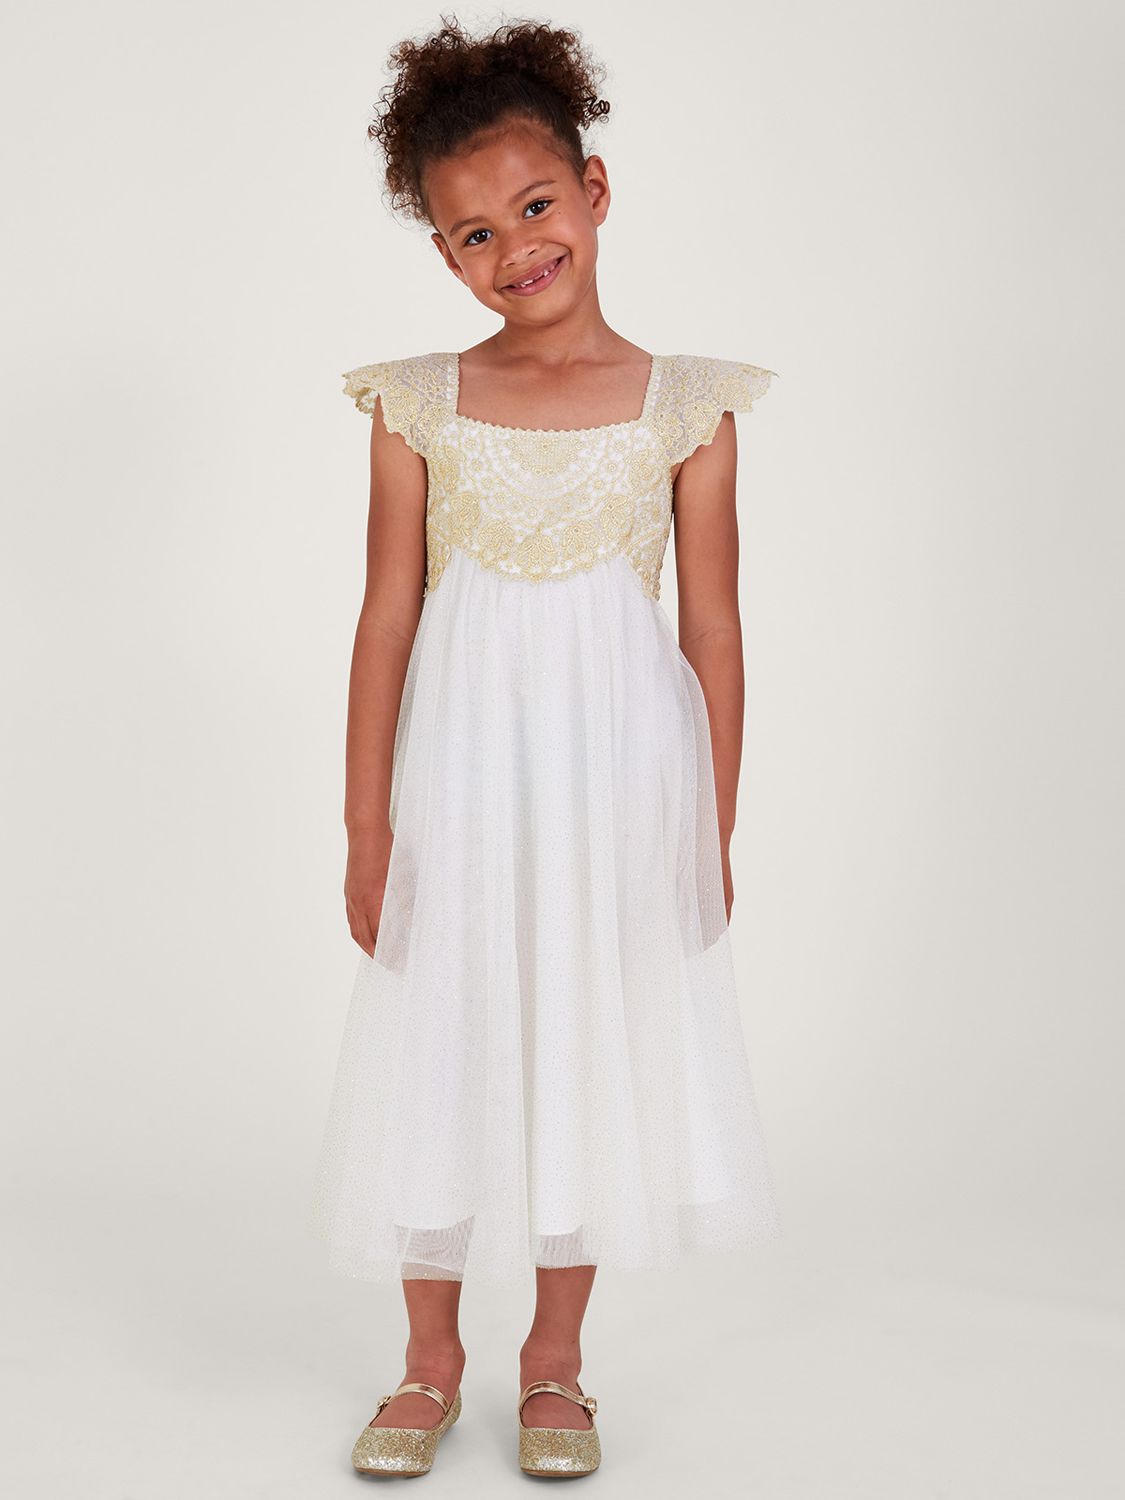 Monsoon Kids' Estella Lace Embroidered Glitter Party Dress, Gold, 3 years